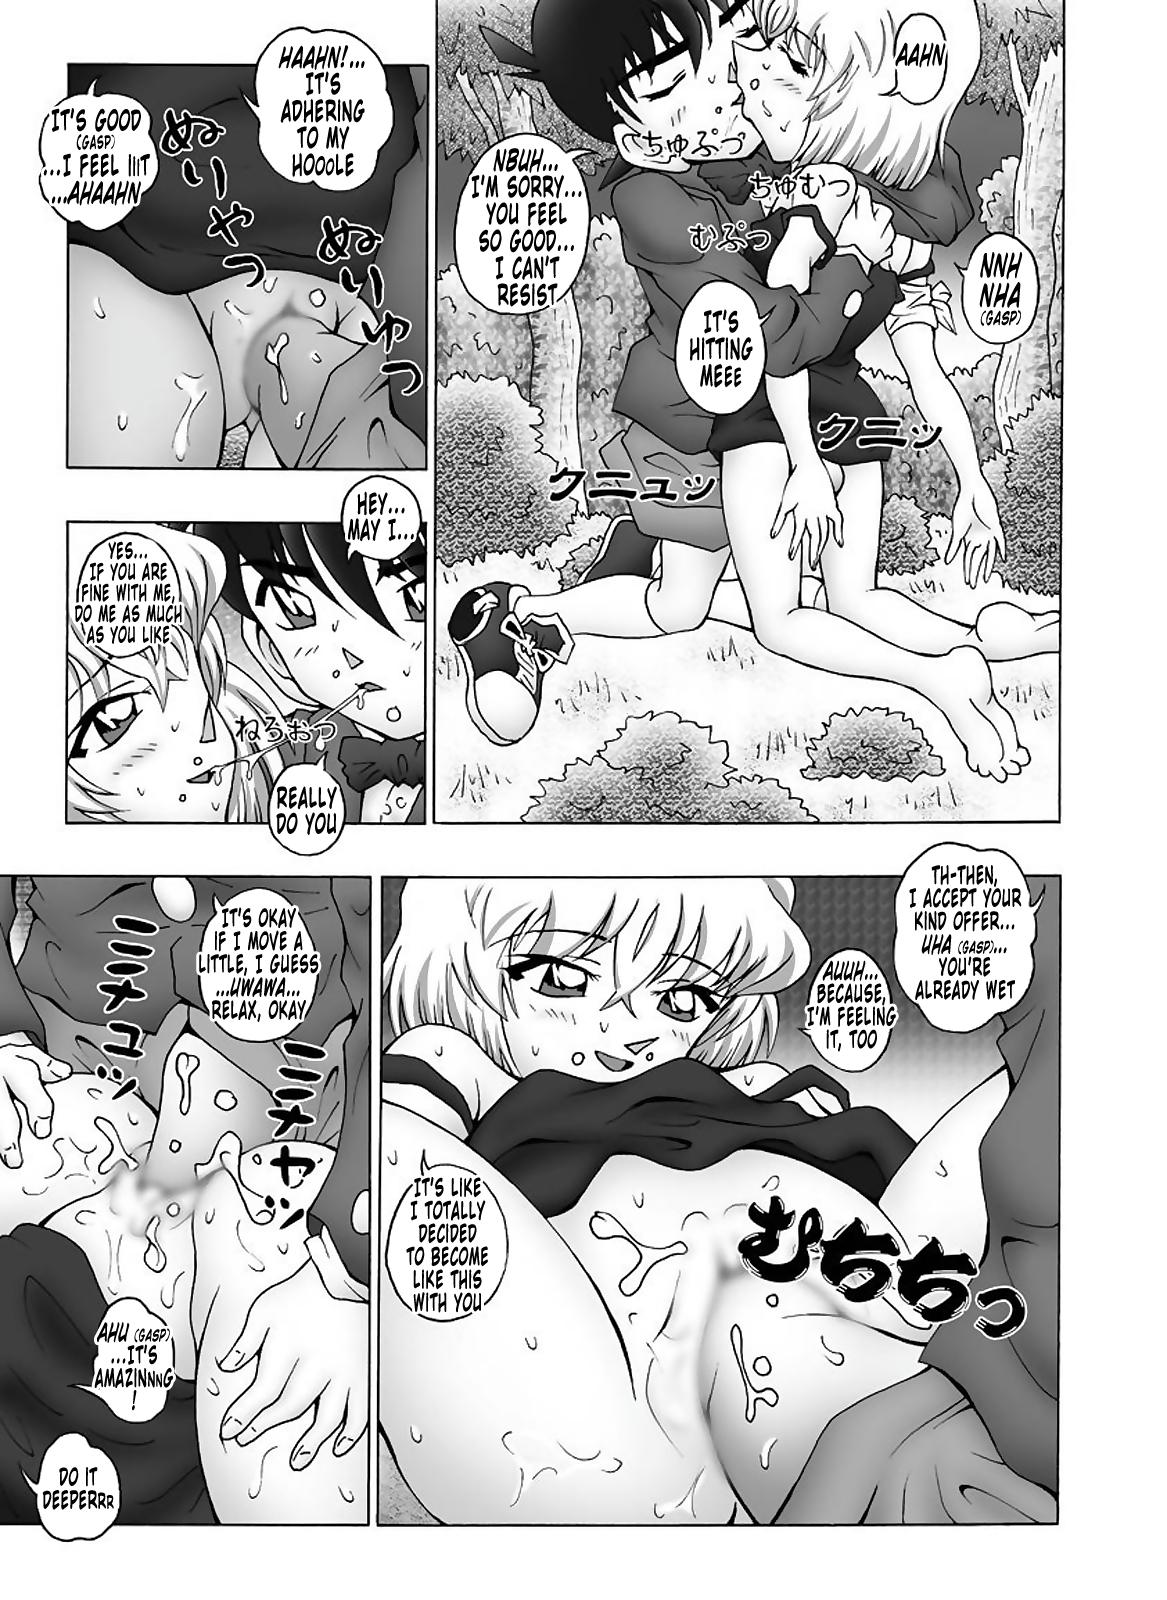 Natural Tits Bumbling Detective Conan - File 12: The Case of Back To The Future - Detective conan Amateur Porn - Page 12